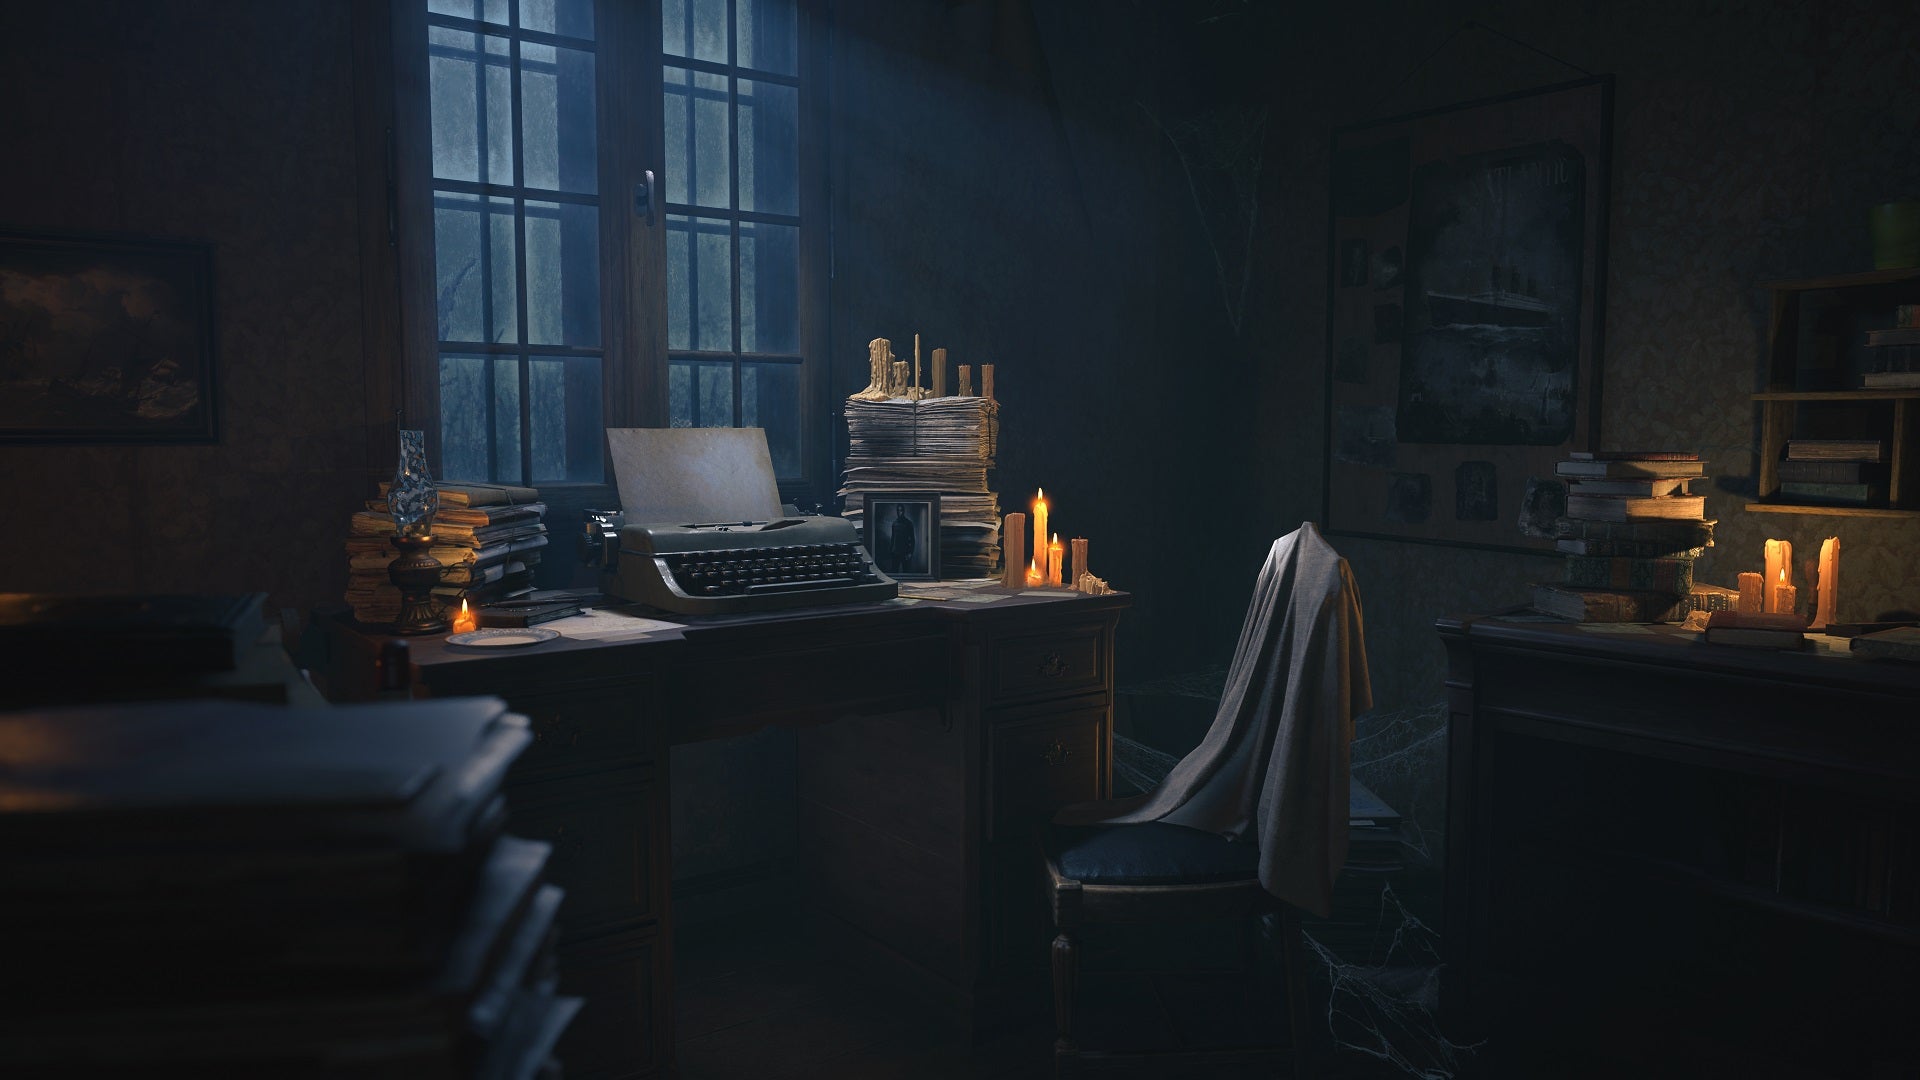 A dimly candle-lit room with a typewriter on a desk under the windows. It's dusk outside and a nearby chair has a shawl or blanket draped over it. The room is very cluttered with books, papers, and pictures on the walls. An unlit oil lamp sits on the table.